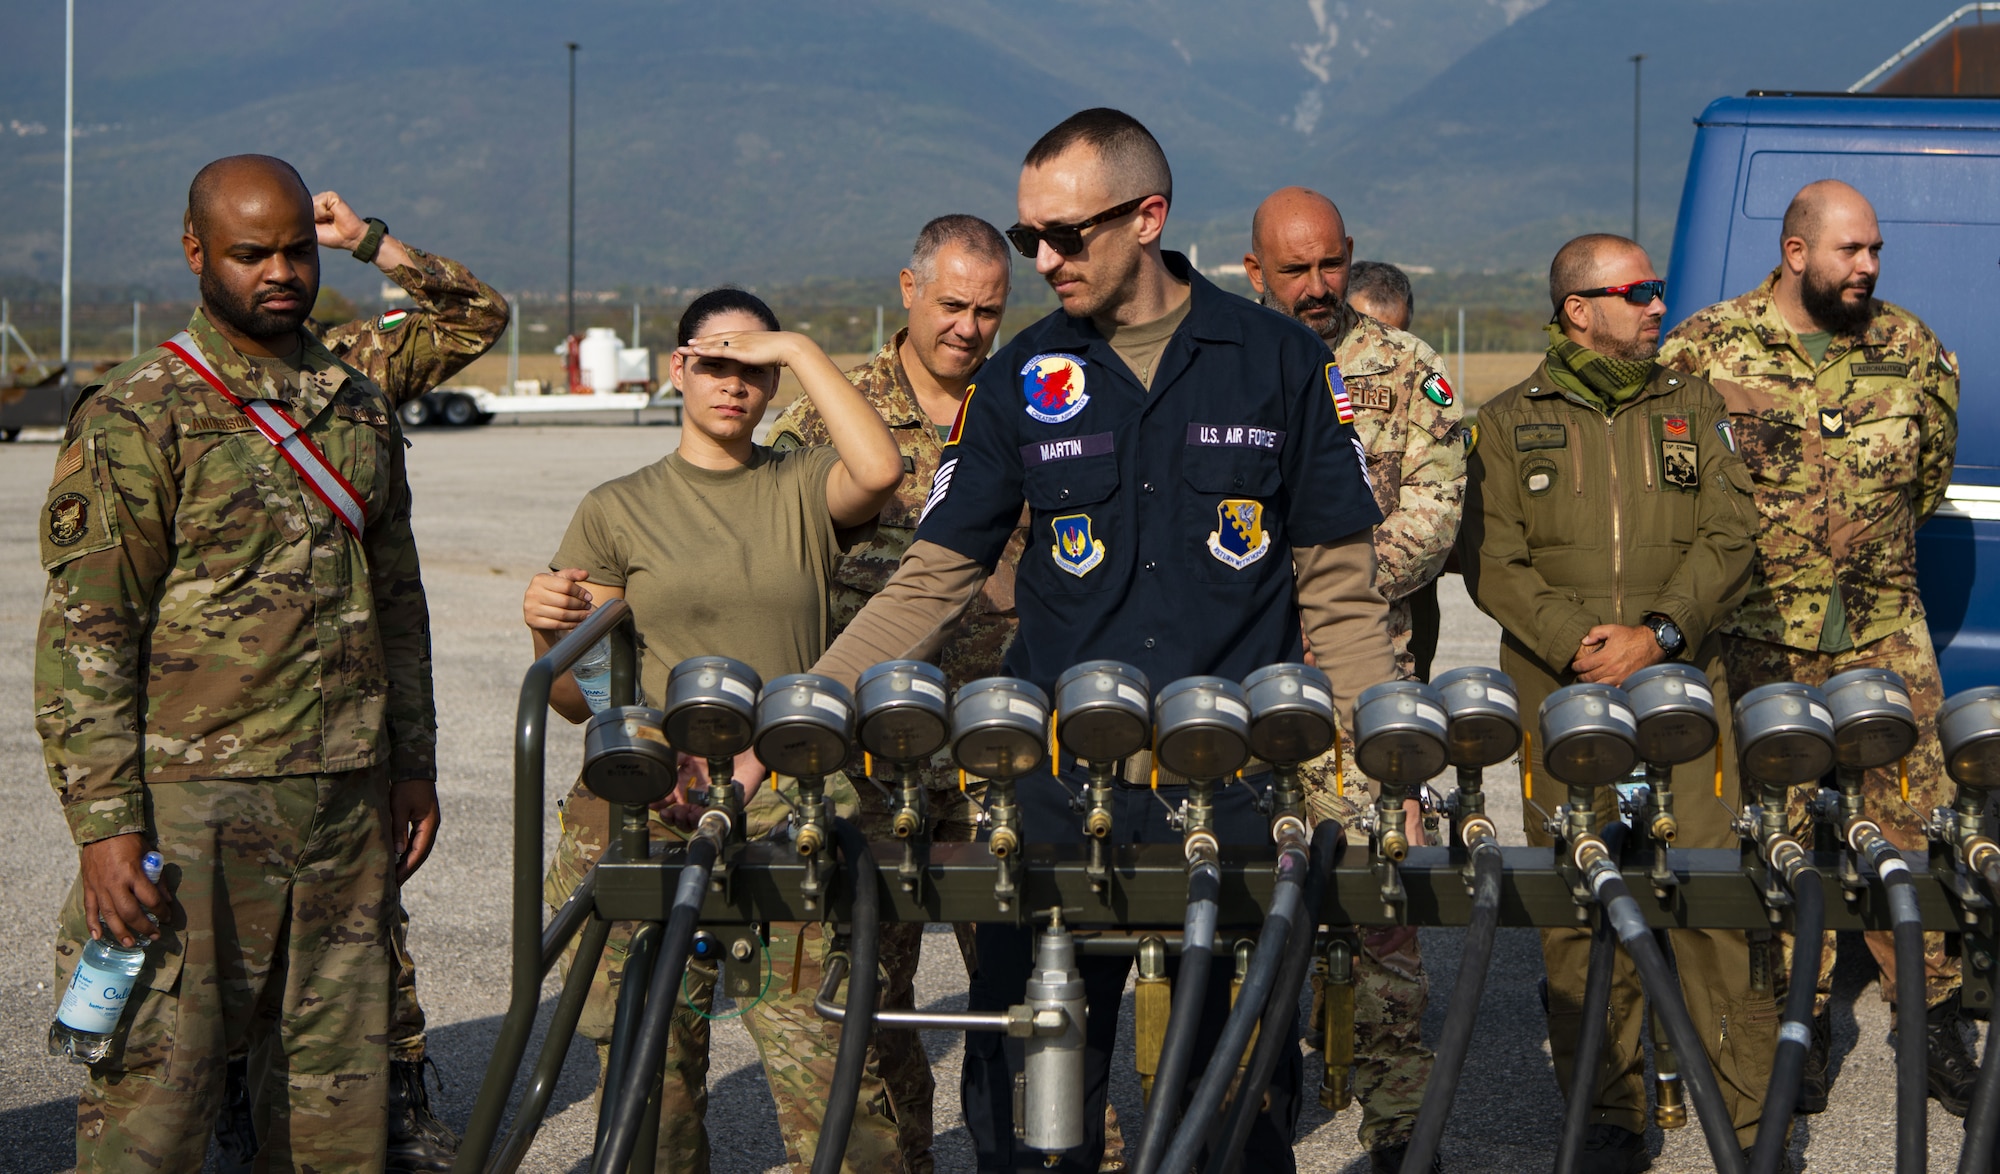 U.S. Airmen and ITAF airmen stand behind an inflation console as they watch a bag lift during a crashed, damaged or disabled aircraft recovery (CDDAR) training at Aviano Air Base, Italy, Oct. 20, 2022. Airmen from Ramstein as well as Spangdahlem Air Force Base in Germany and the Italian air force were involved in the joint training. (U.S. Air Force photo by Airman 1st Class Thomas Calopedis)